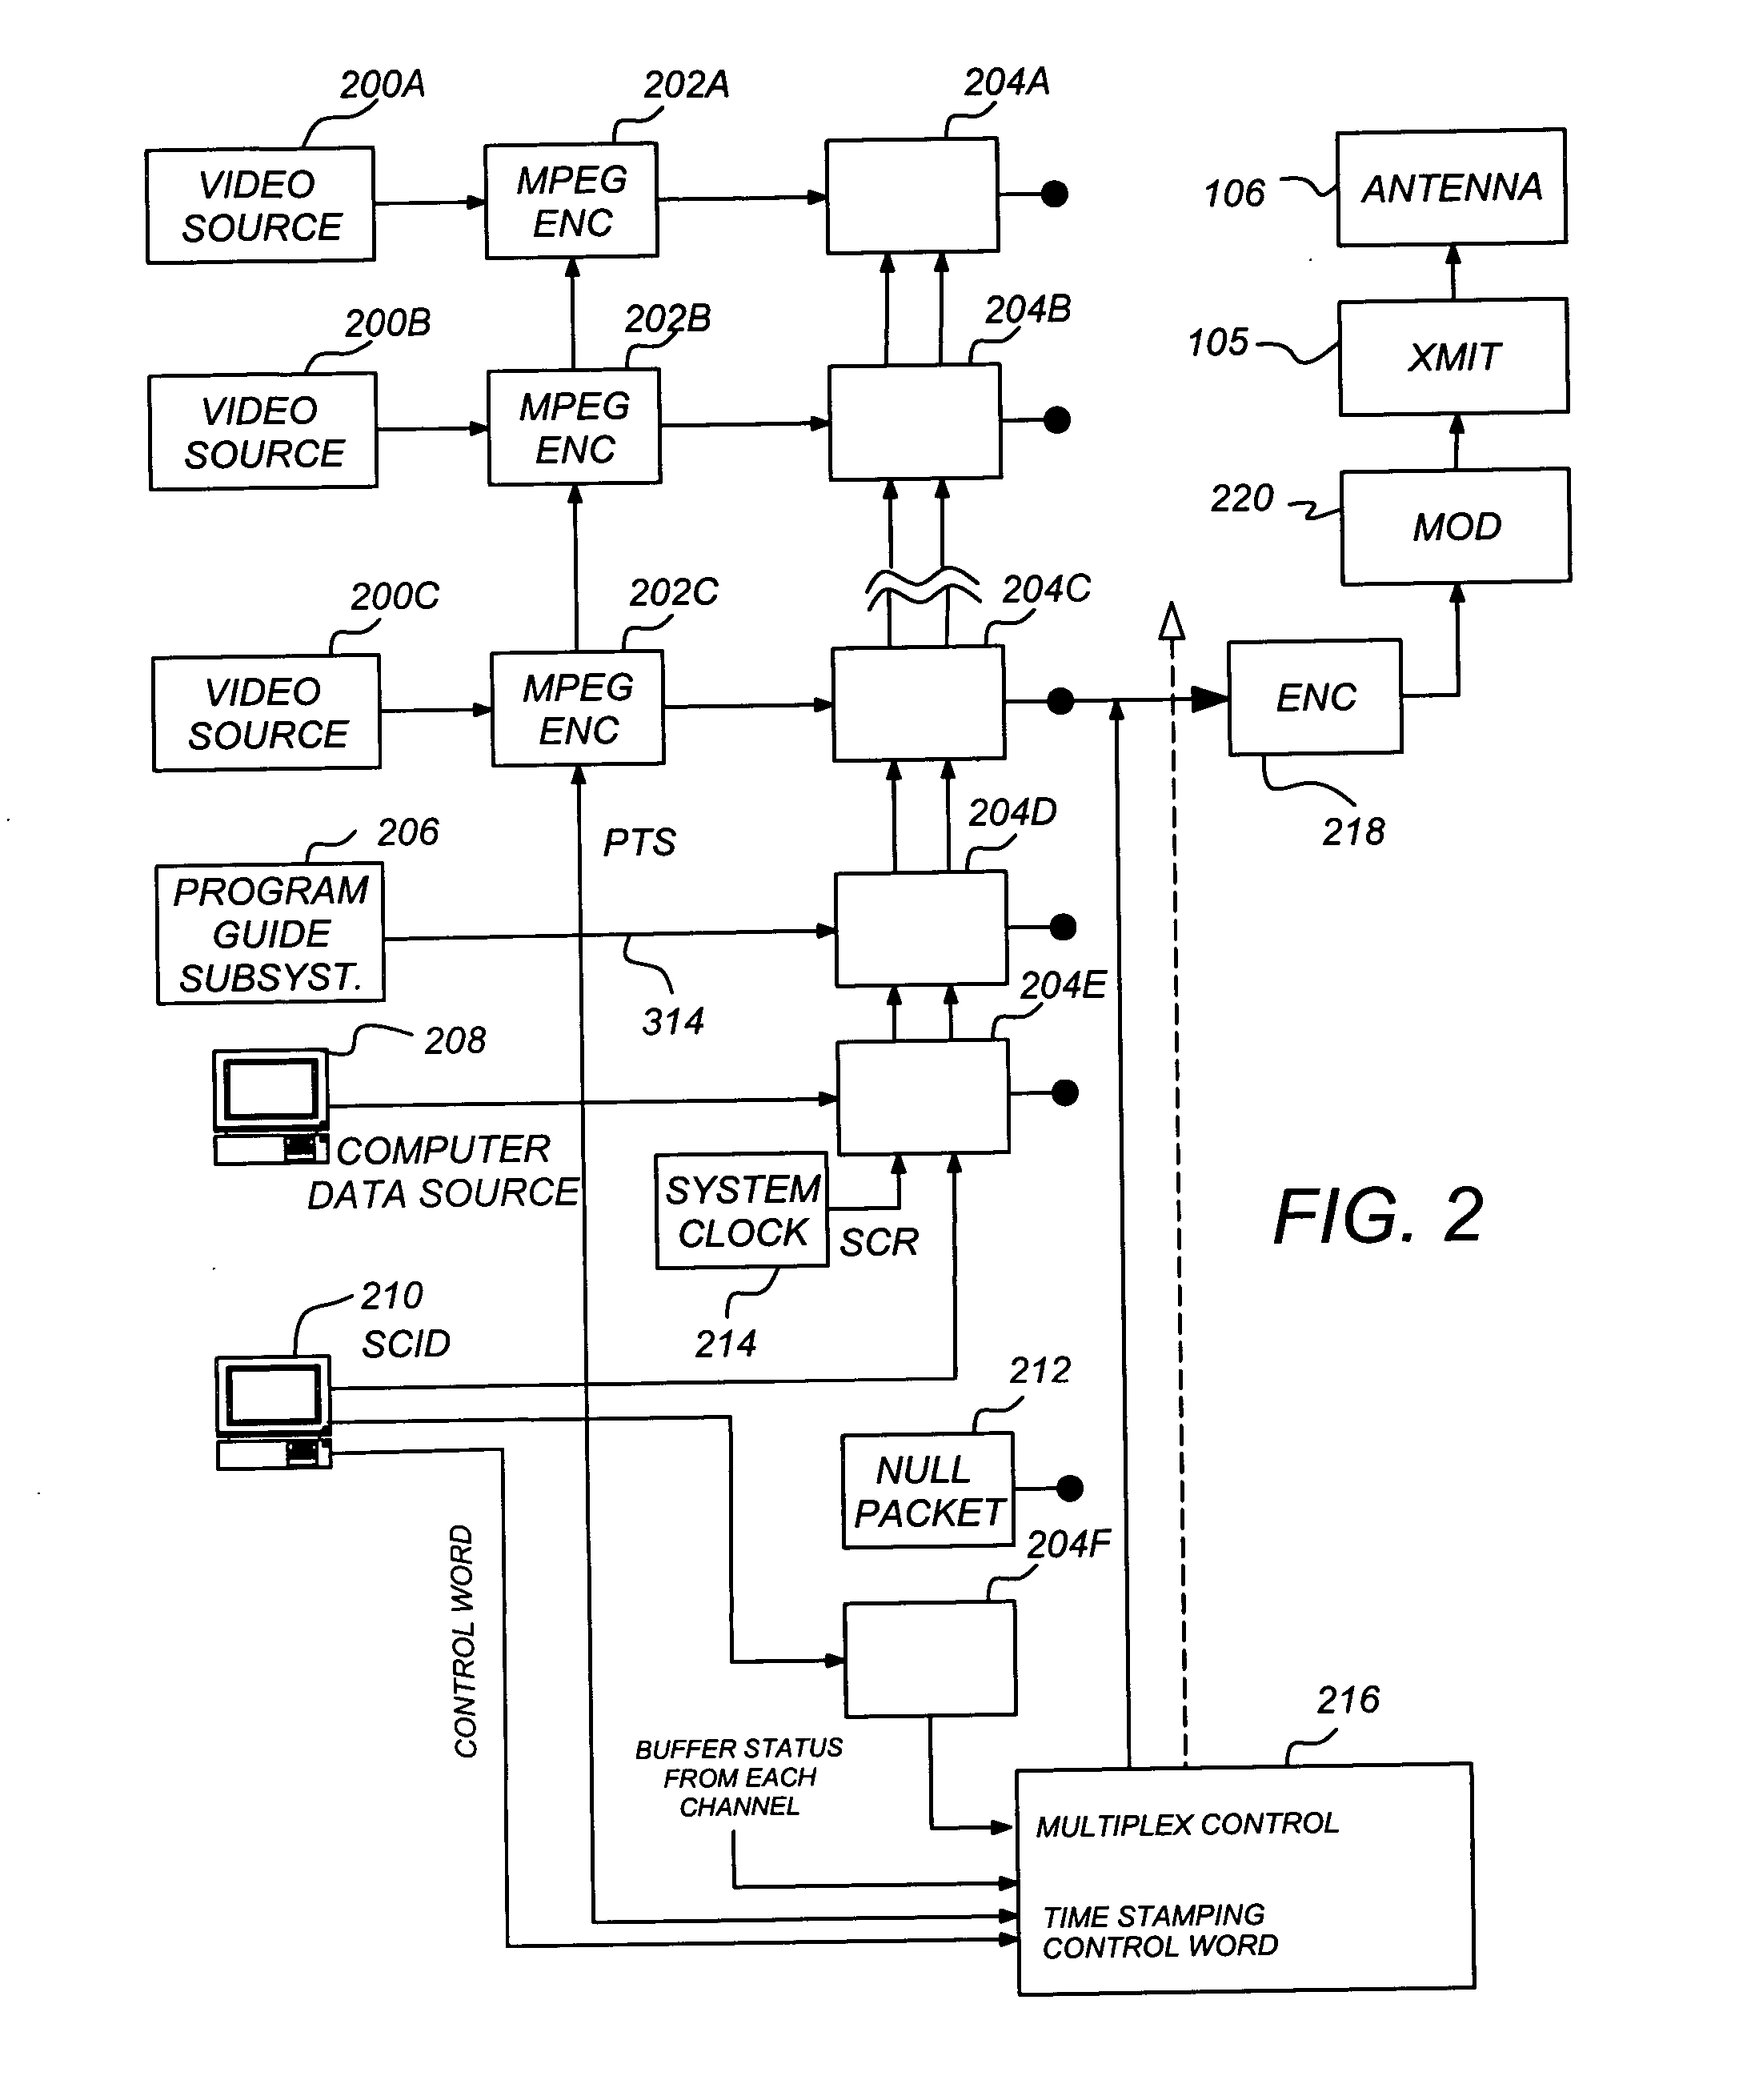 Carrier to noise ratio estimations from a received signal